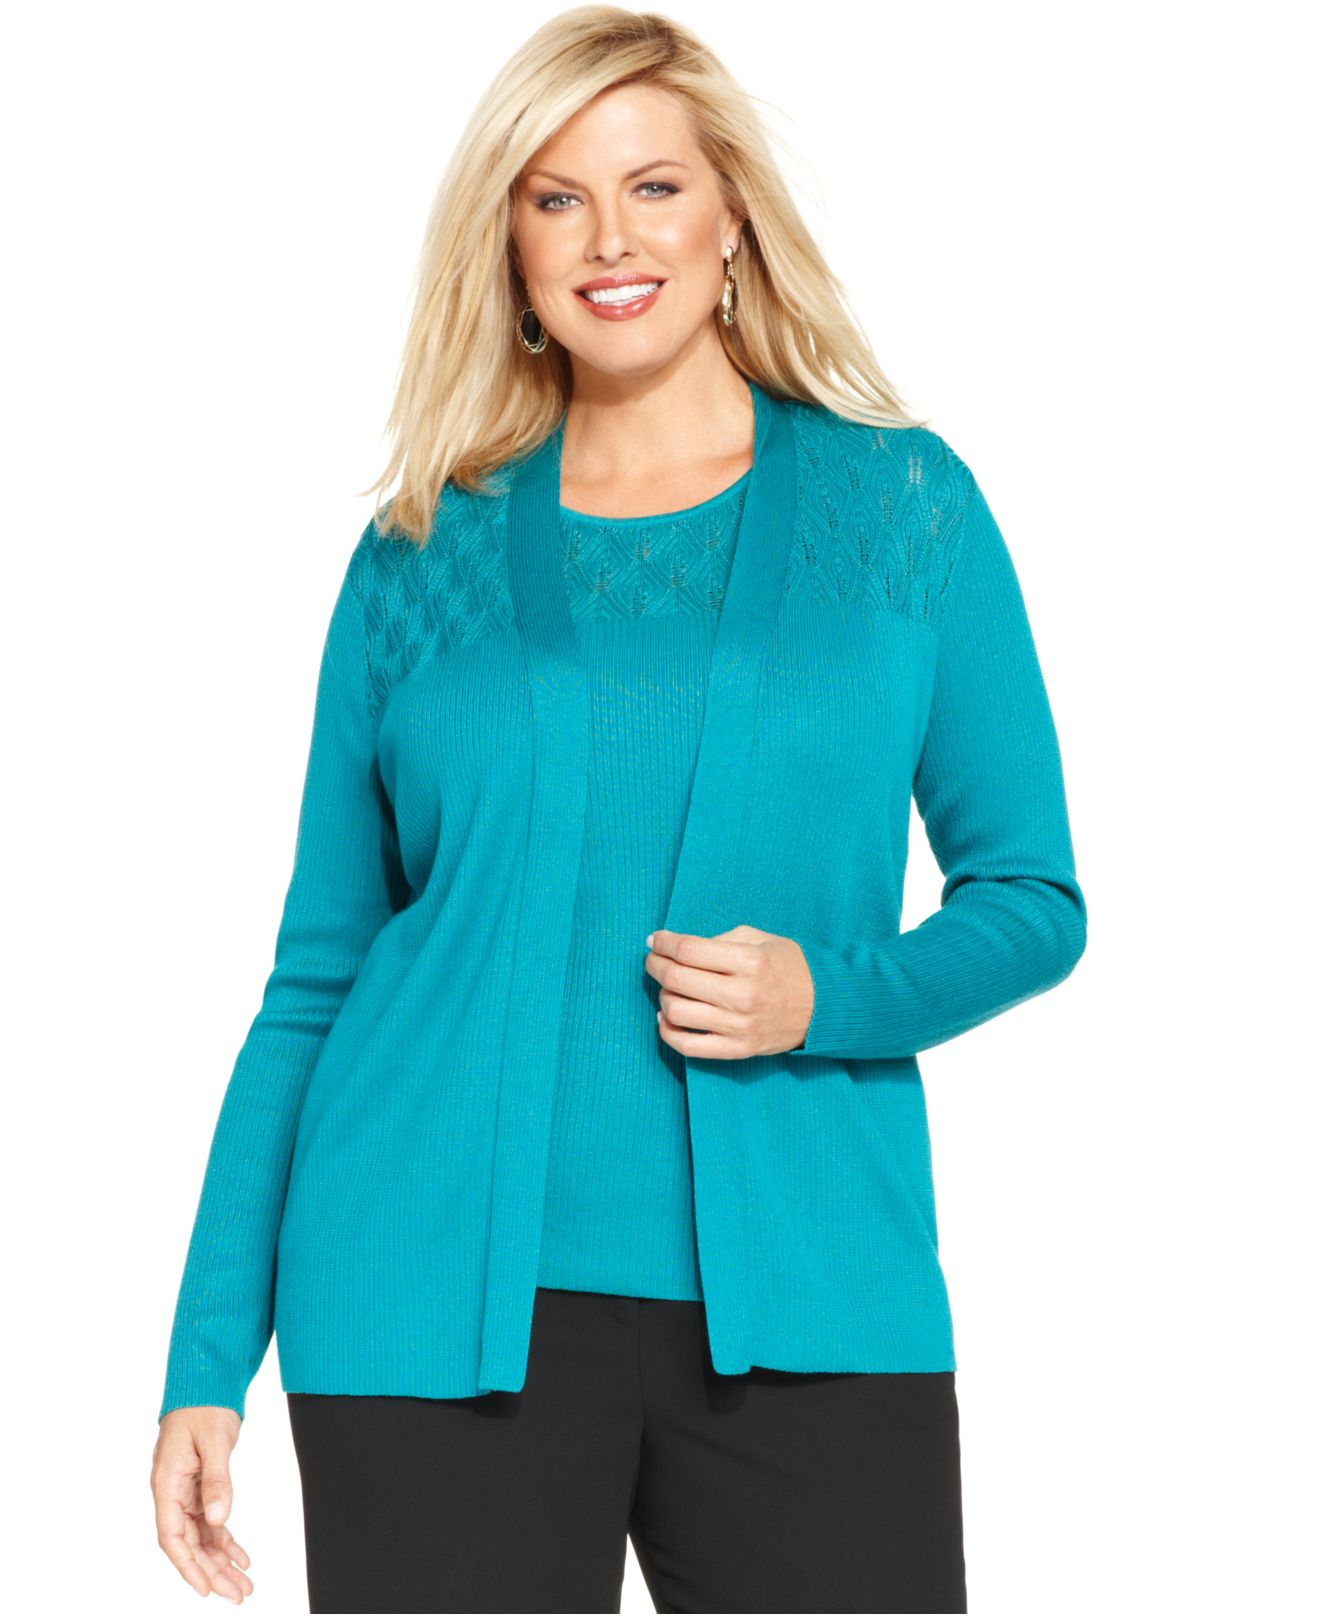 Lyst - Jones New York Collection Plus Size Pointelle Cardigan in Blue